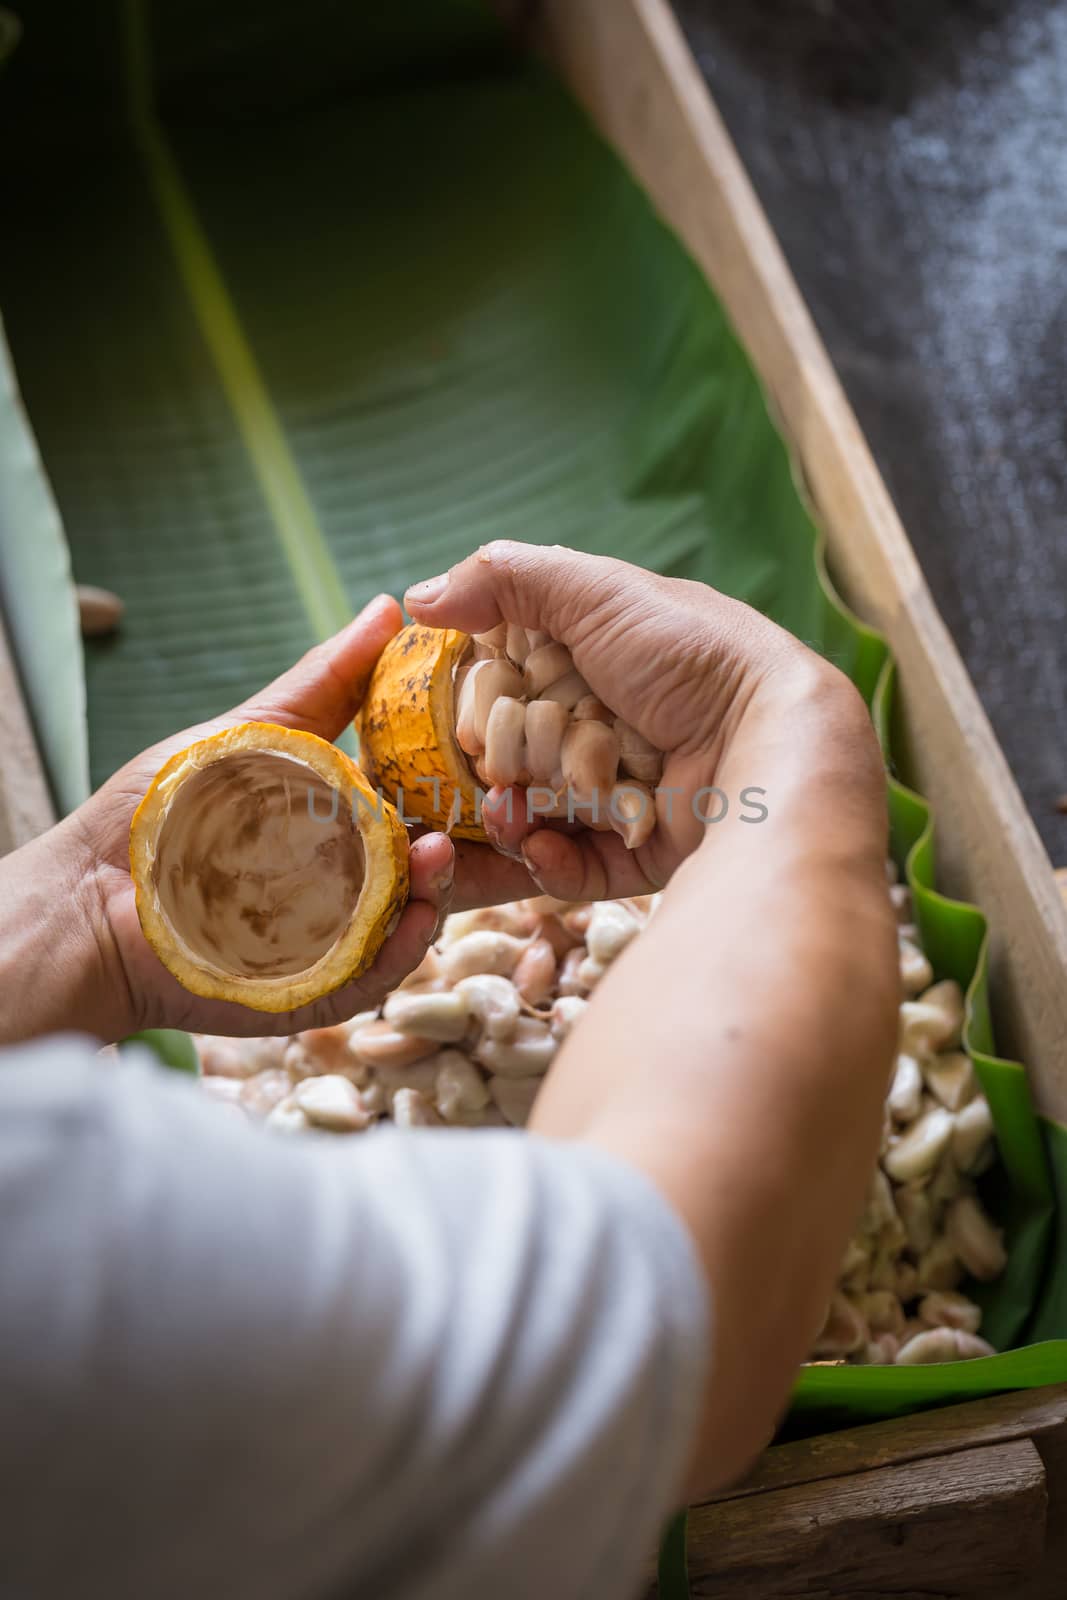 opened raw fresh cocoa pod in hands with beans inside. by kaiskynet